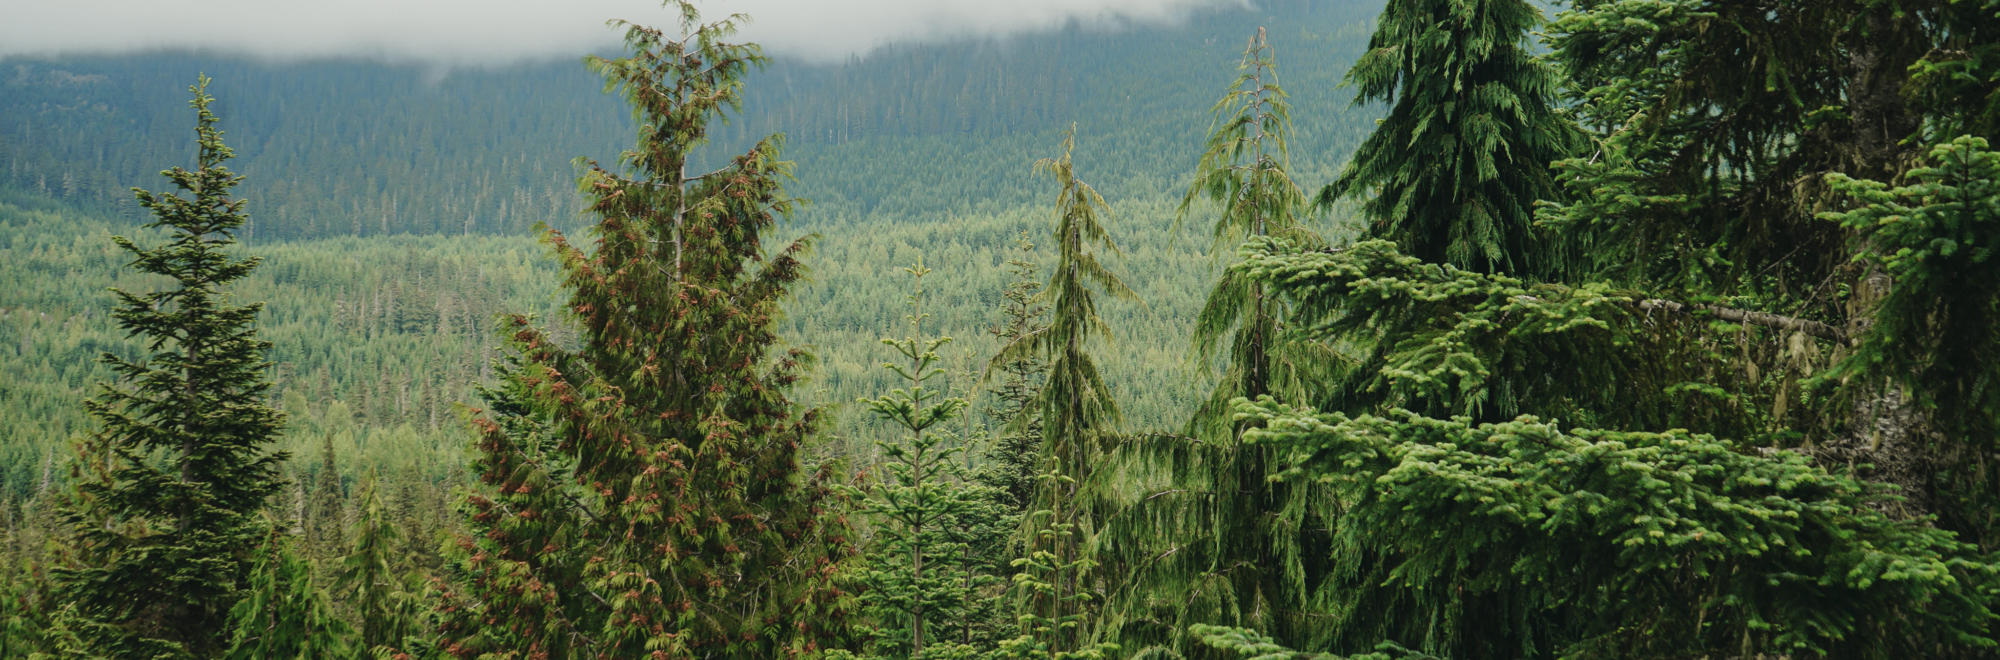 A variety of coniferous trees sit in the foreground before a tree-covered mountain beneath a low cloud.